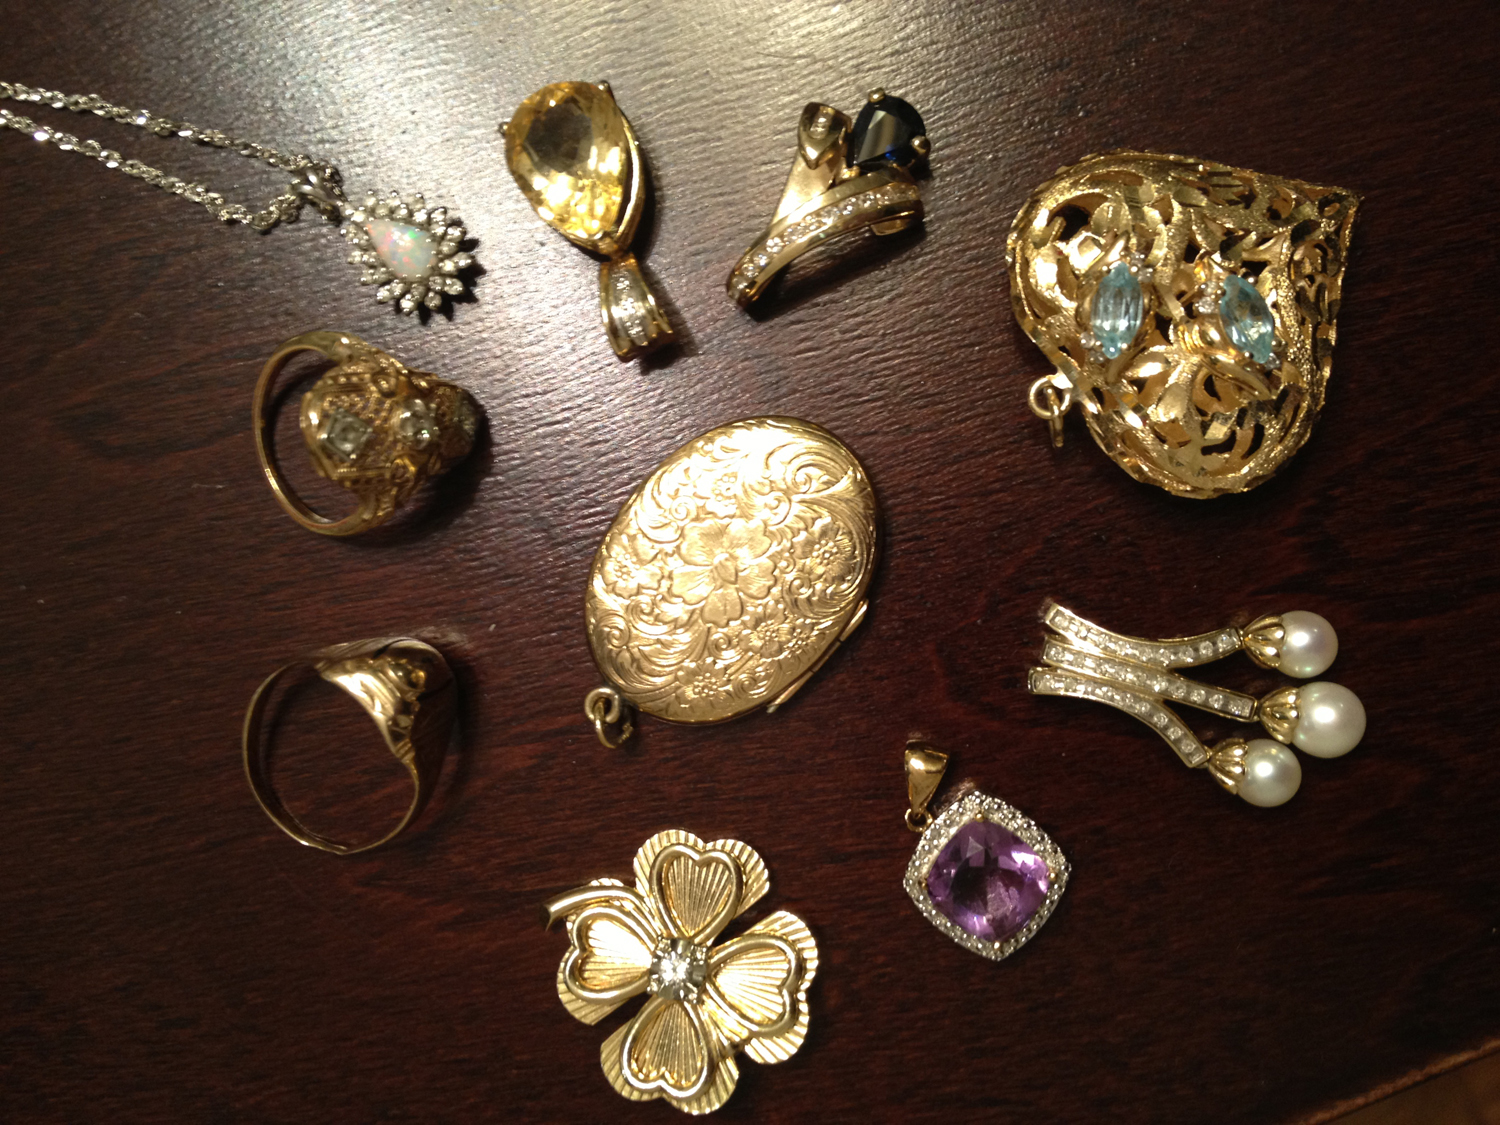 Halcyon Days: To Re-purpose Old Jewelry, Or Not